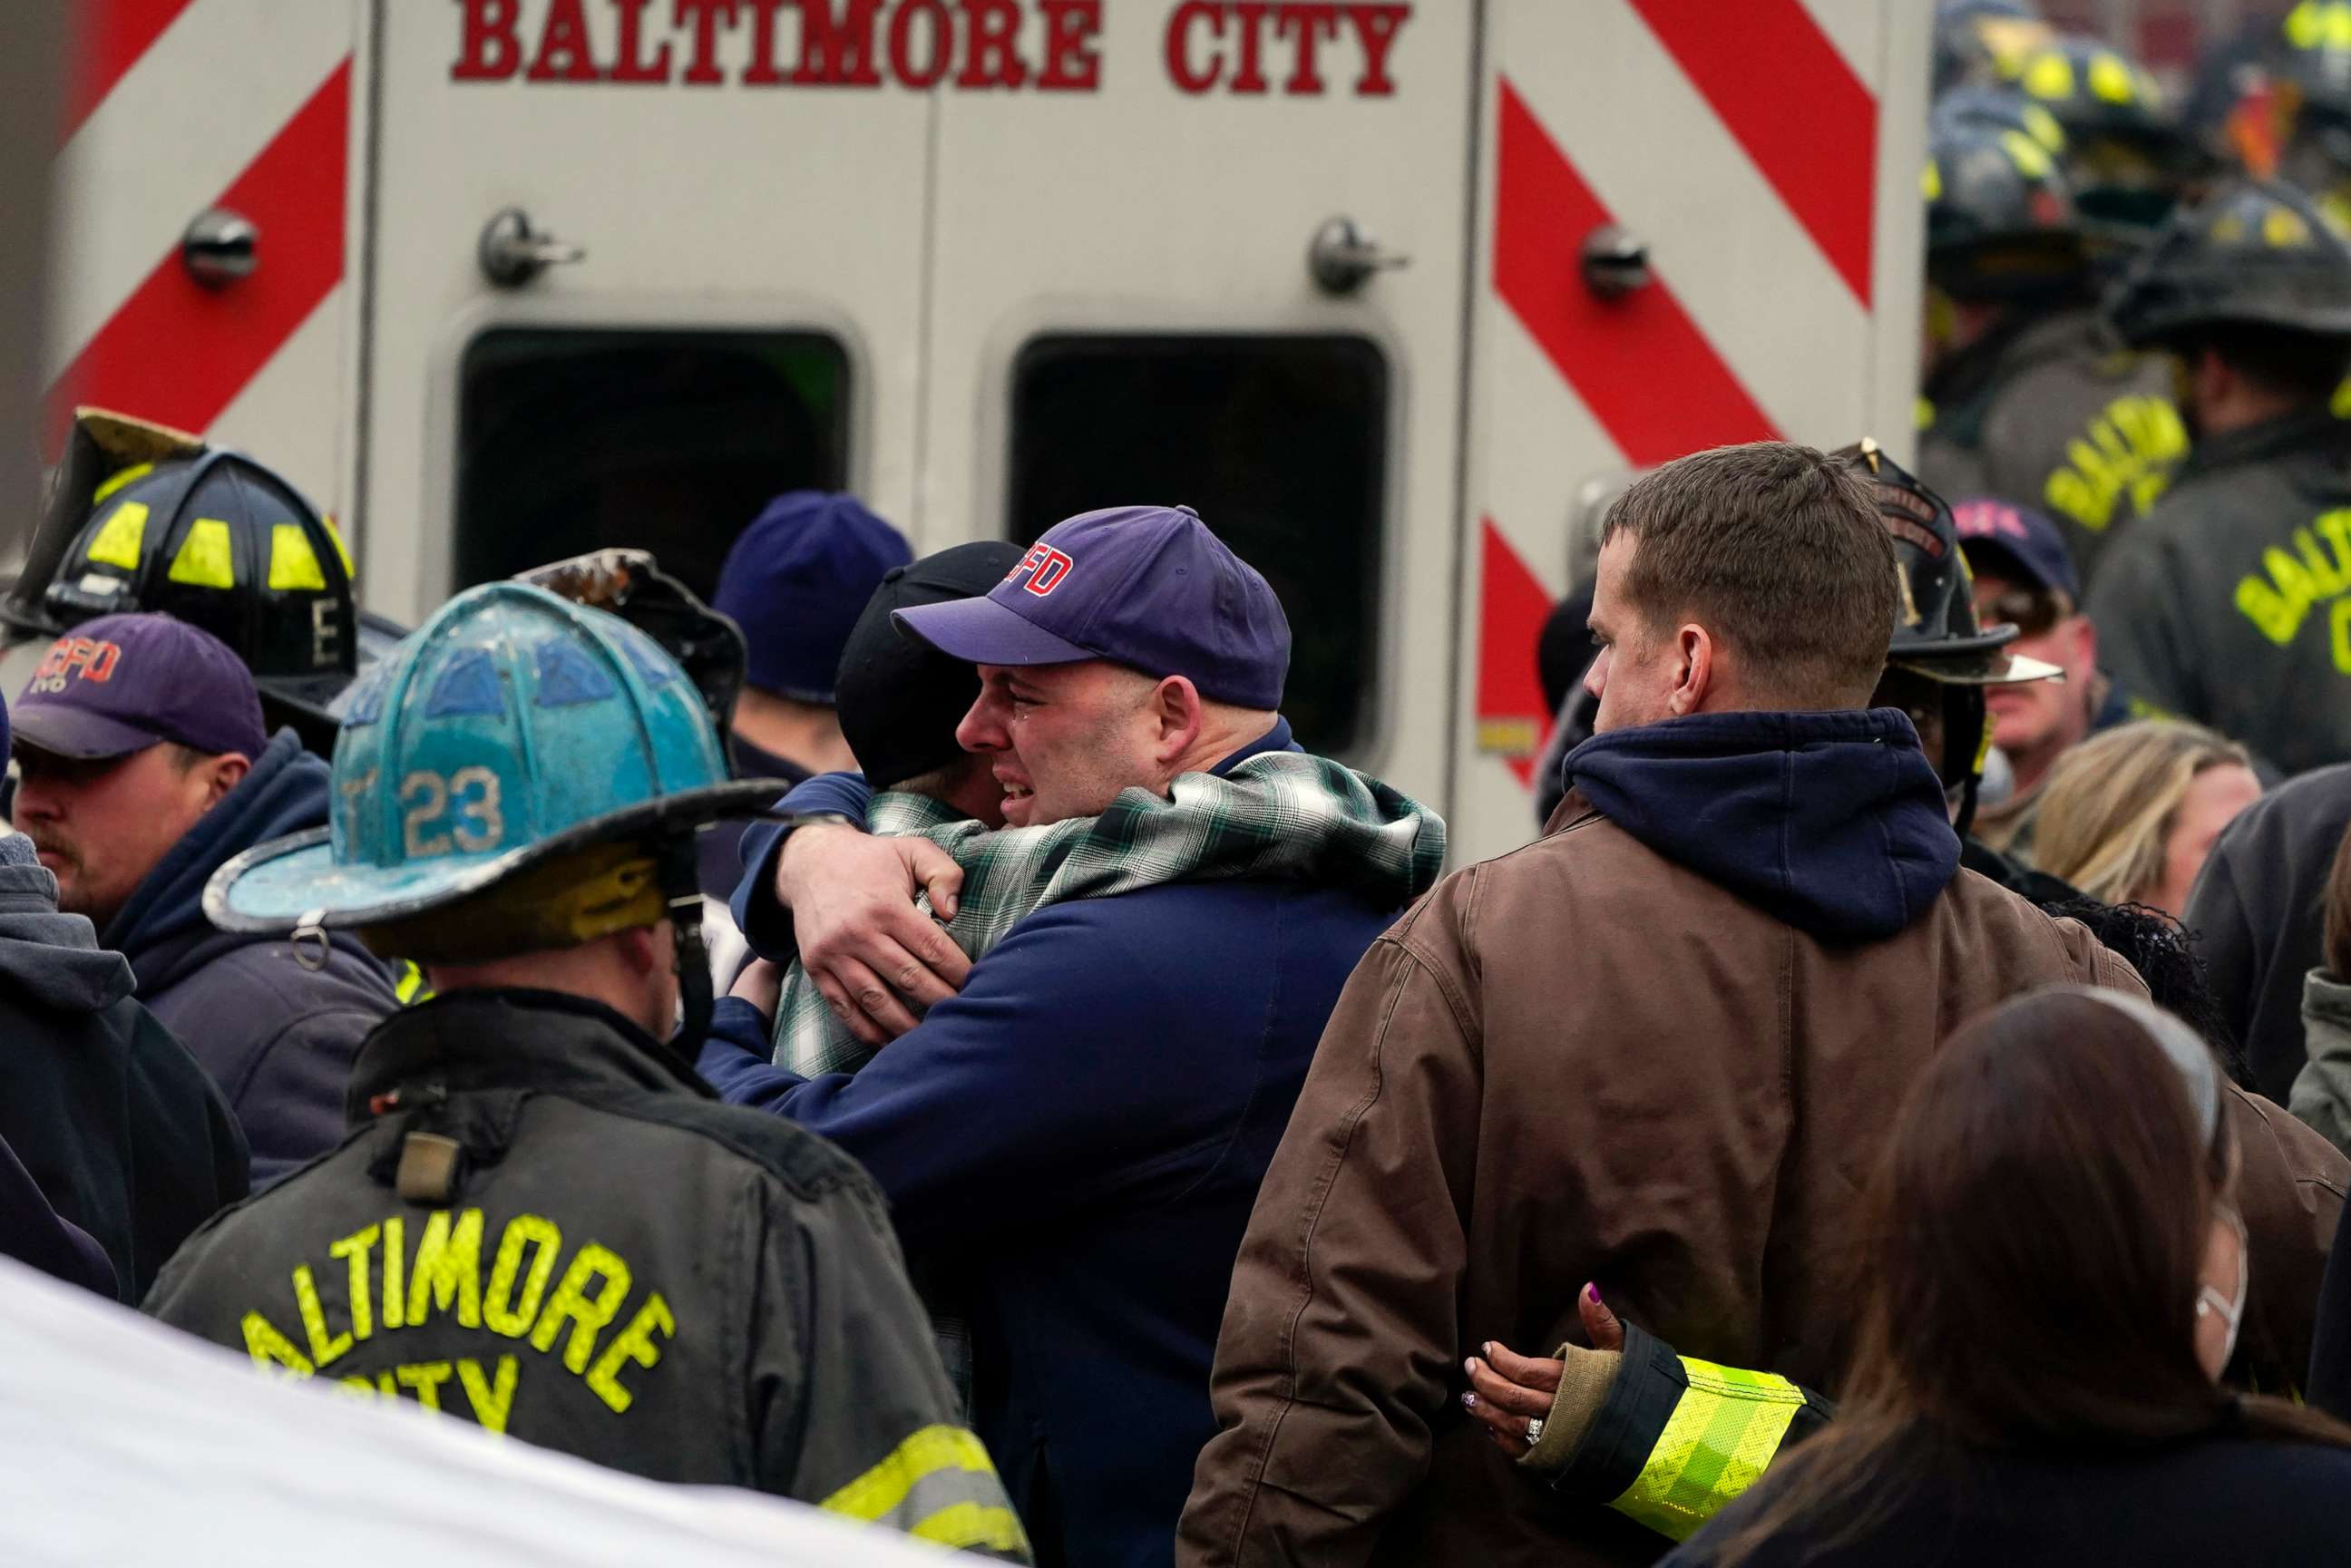 PHOTO: People embrace after a deceased firefighter was put into an ambulance following a building collapse while firefighters battled a two-alarm fire at a vacant row home, Jan. 24, 2022, in Baltimore. Three firefighters died. 